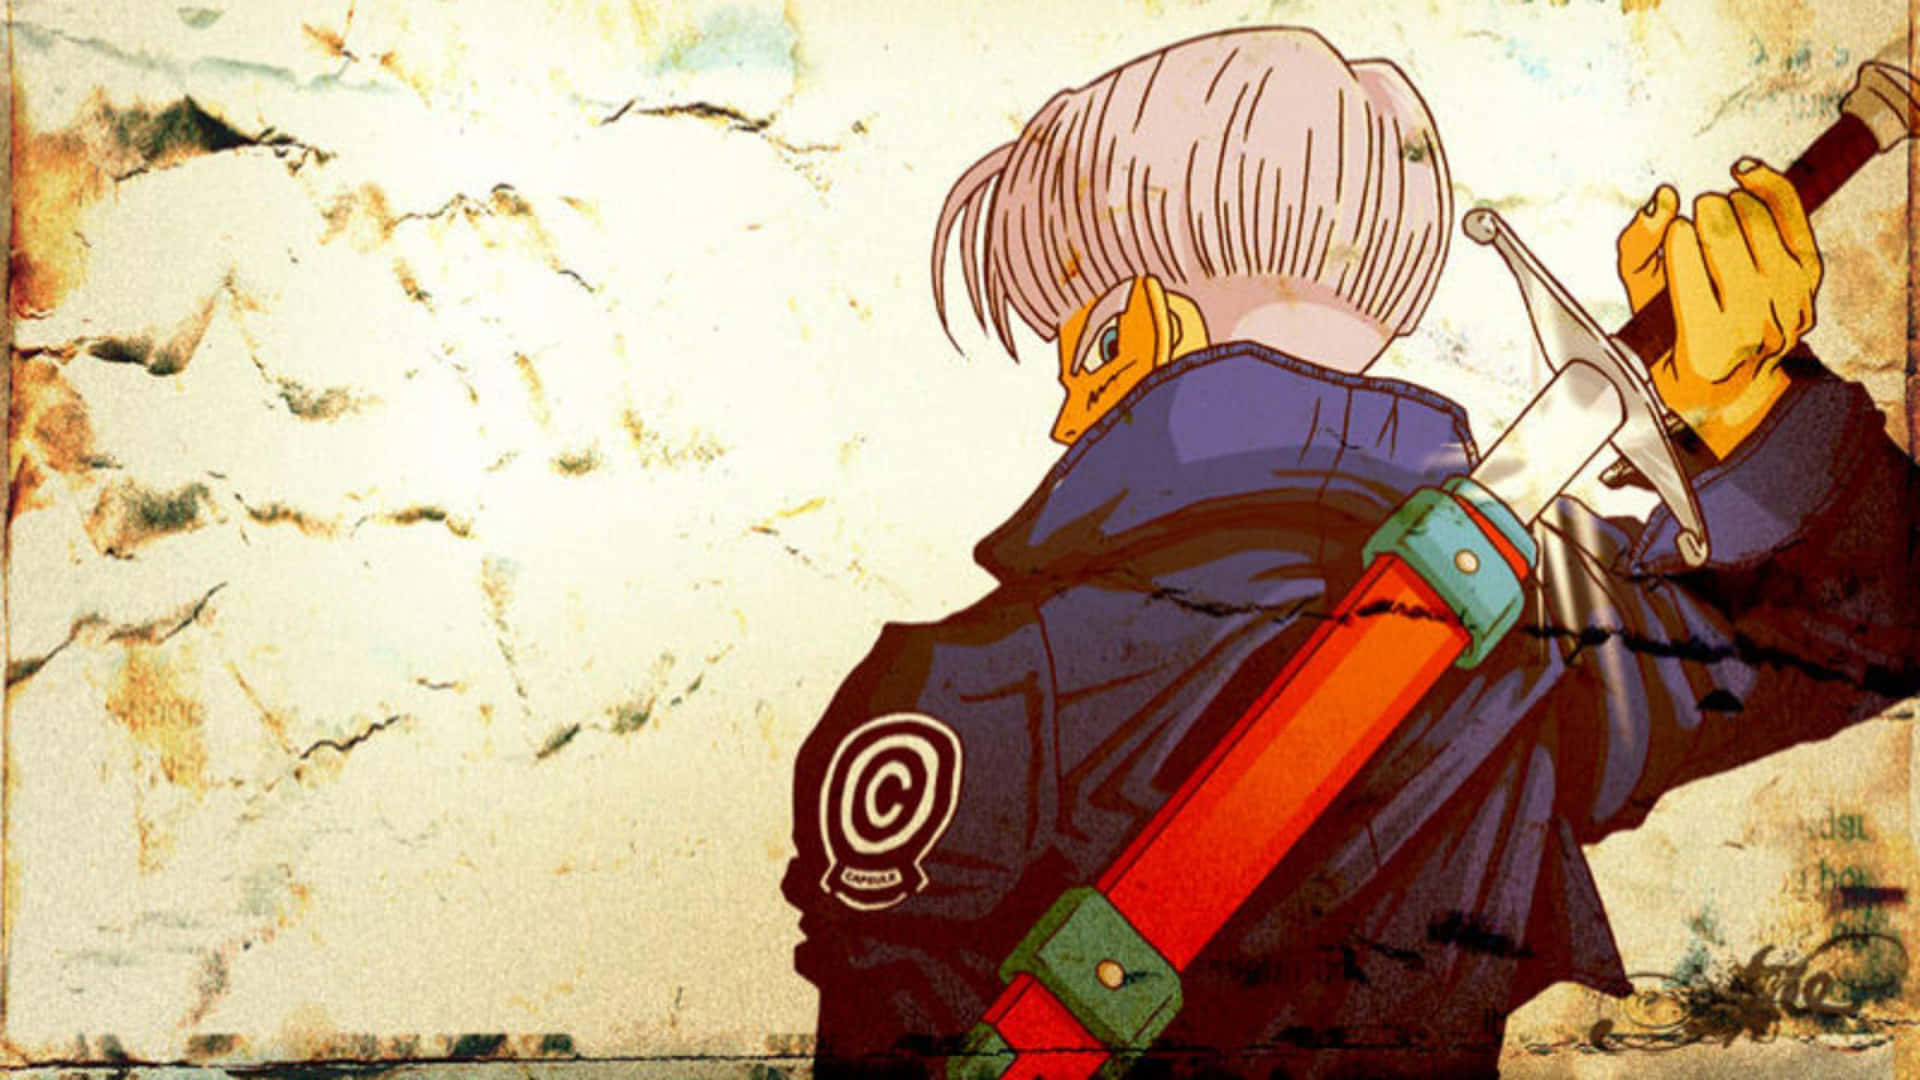 Trunks Getting Sword From His Back Background